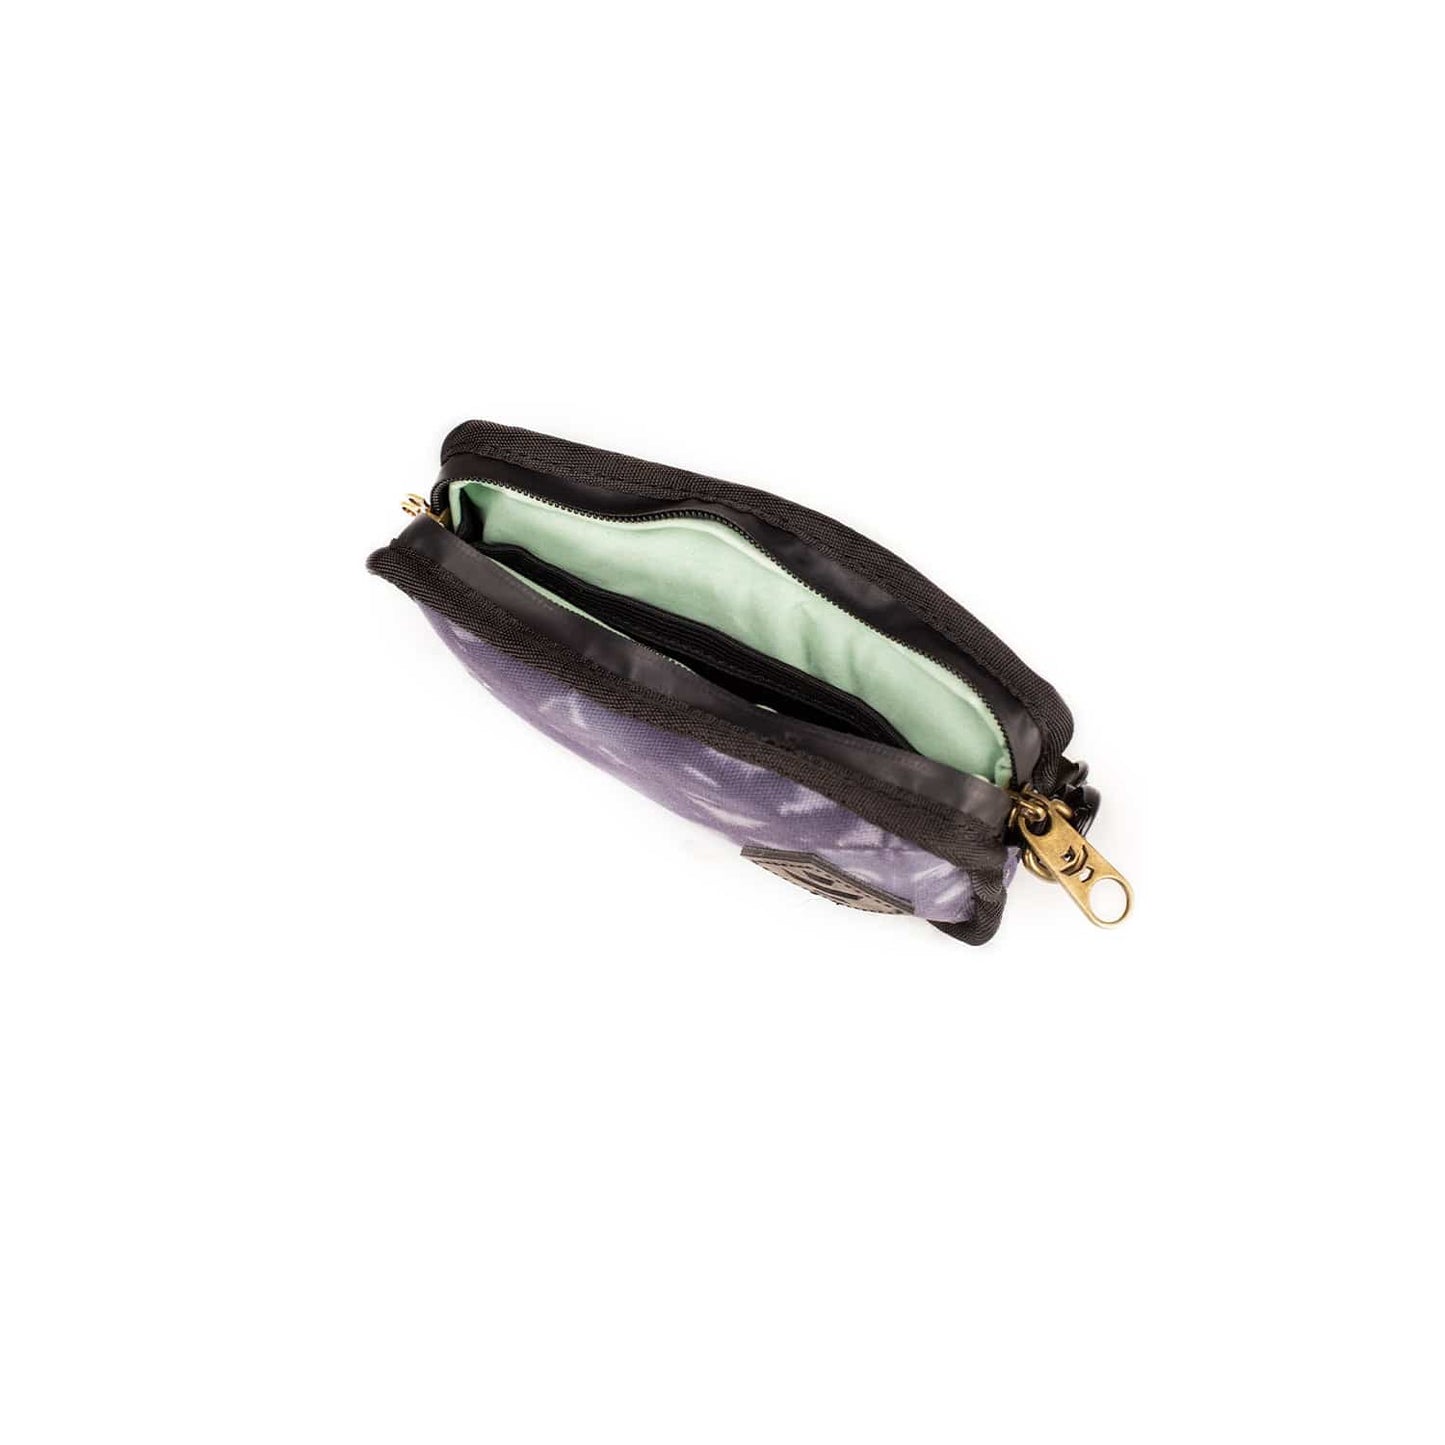 Revelry Supply The Gordito - Smell Proof Padded Pouch